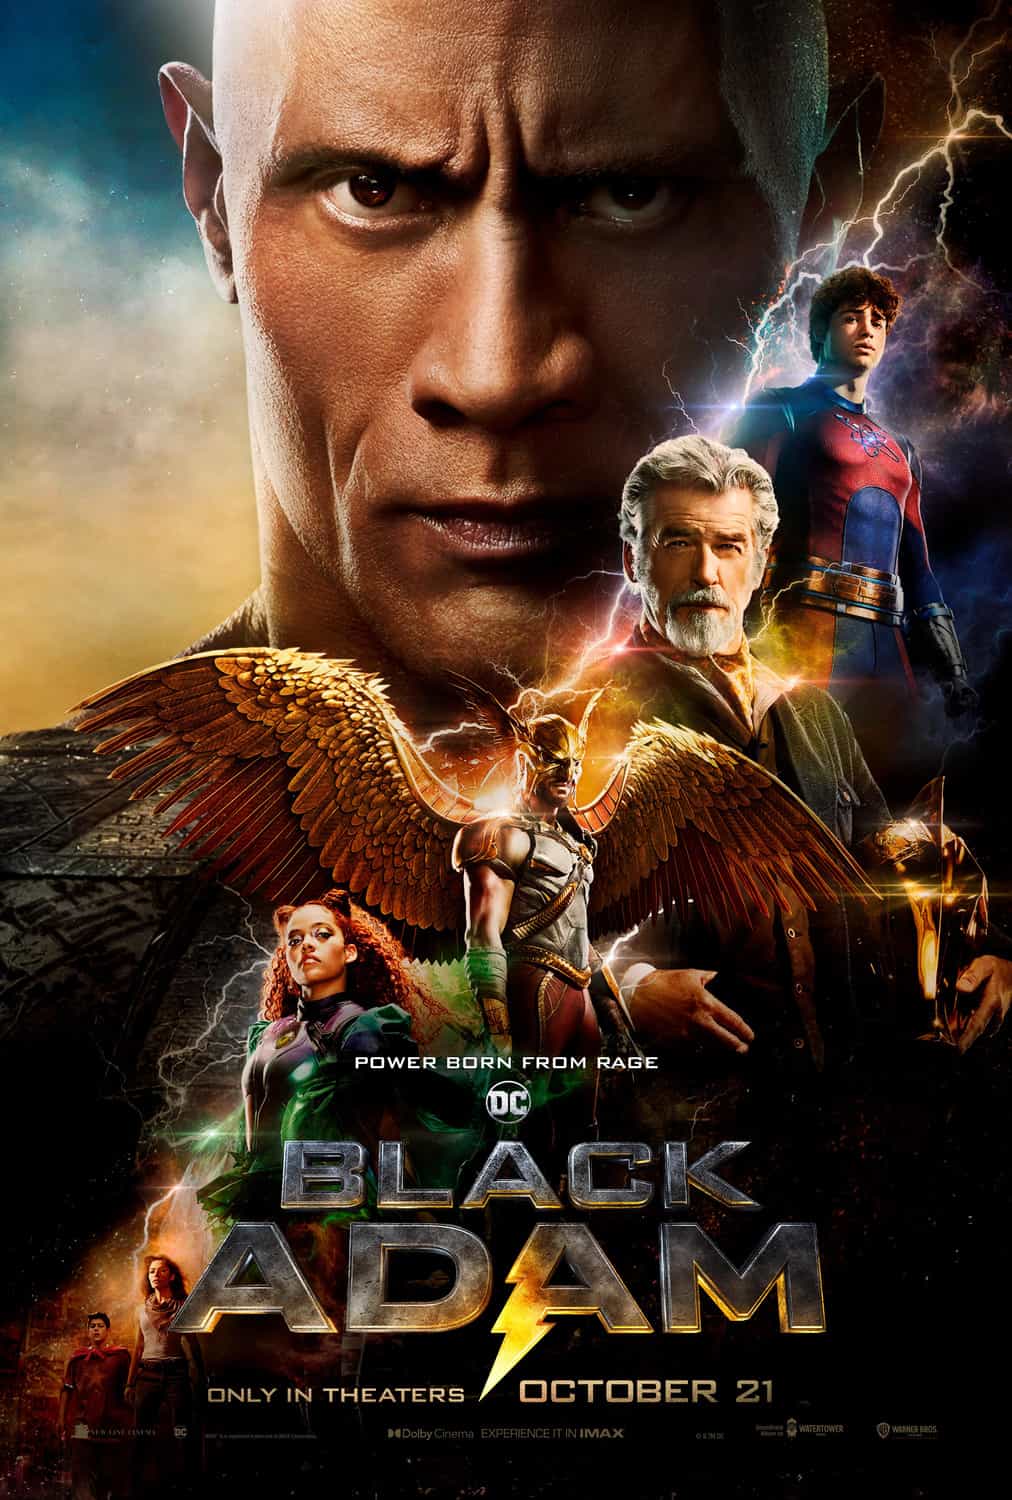 Black Adam is given a 12A age rating in the UK for moderate violence, threat, horror, injury detail